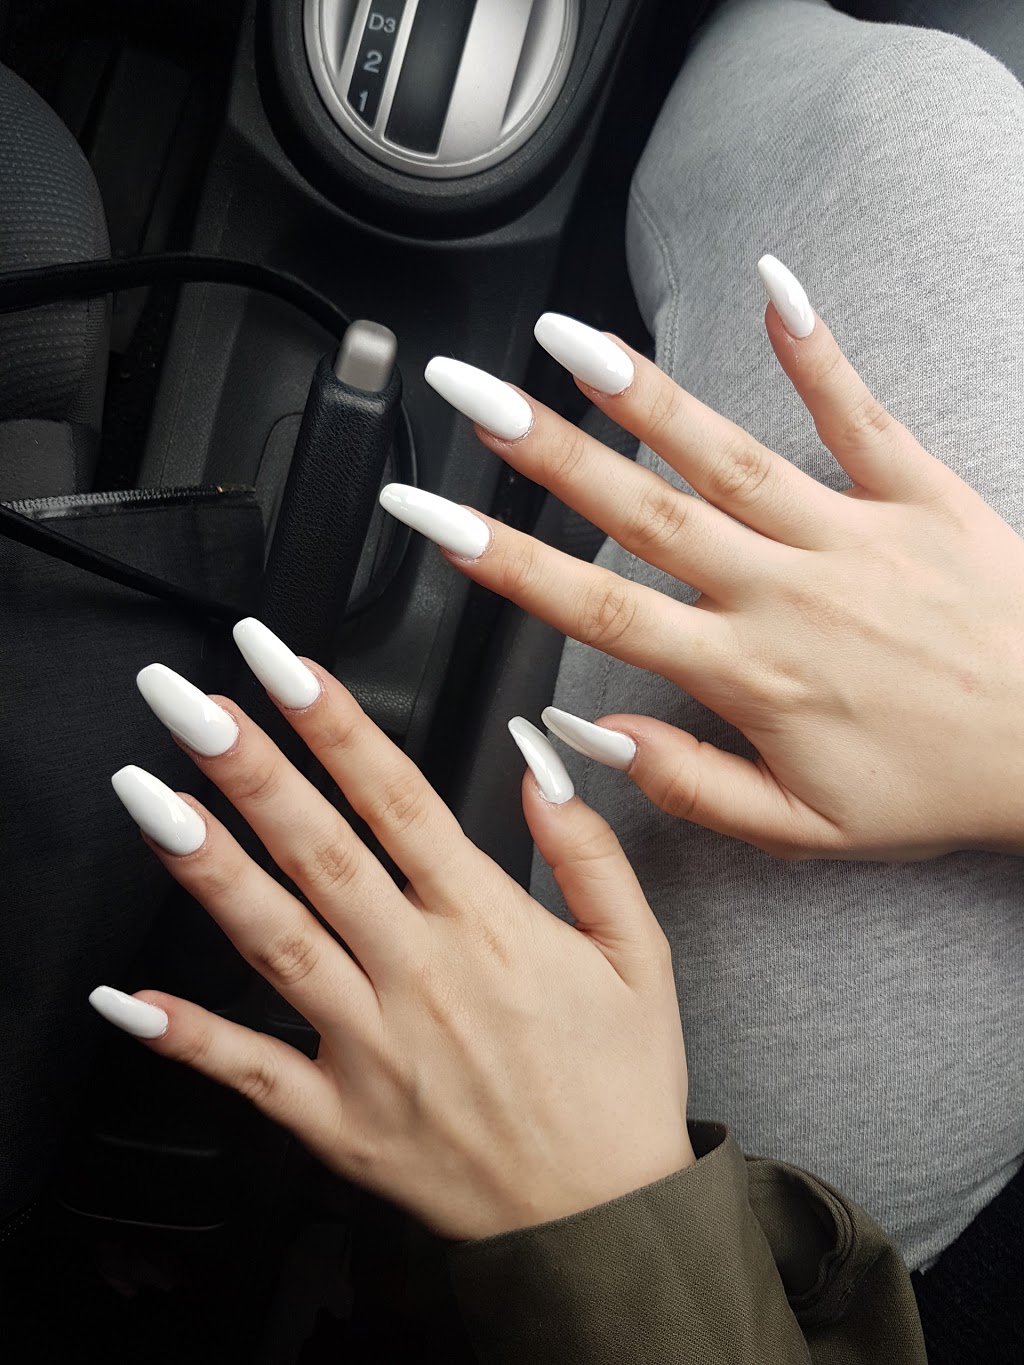 Nails Plus | 130 RR 20, Fonthill, ON L0S 1E0, Canada | Phone: (905) 892-5858